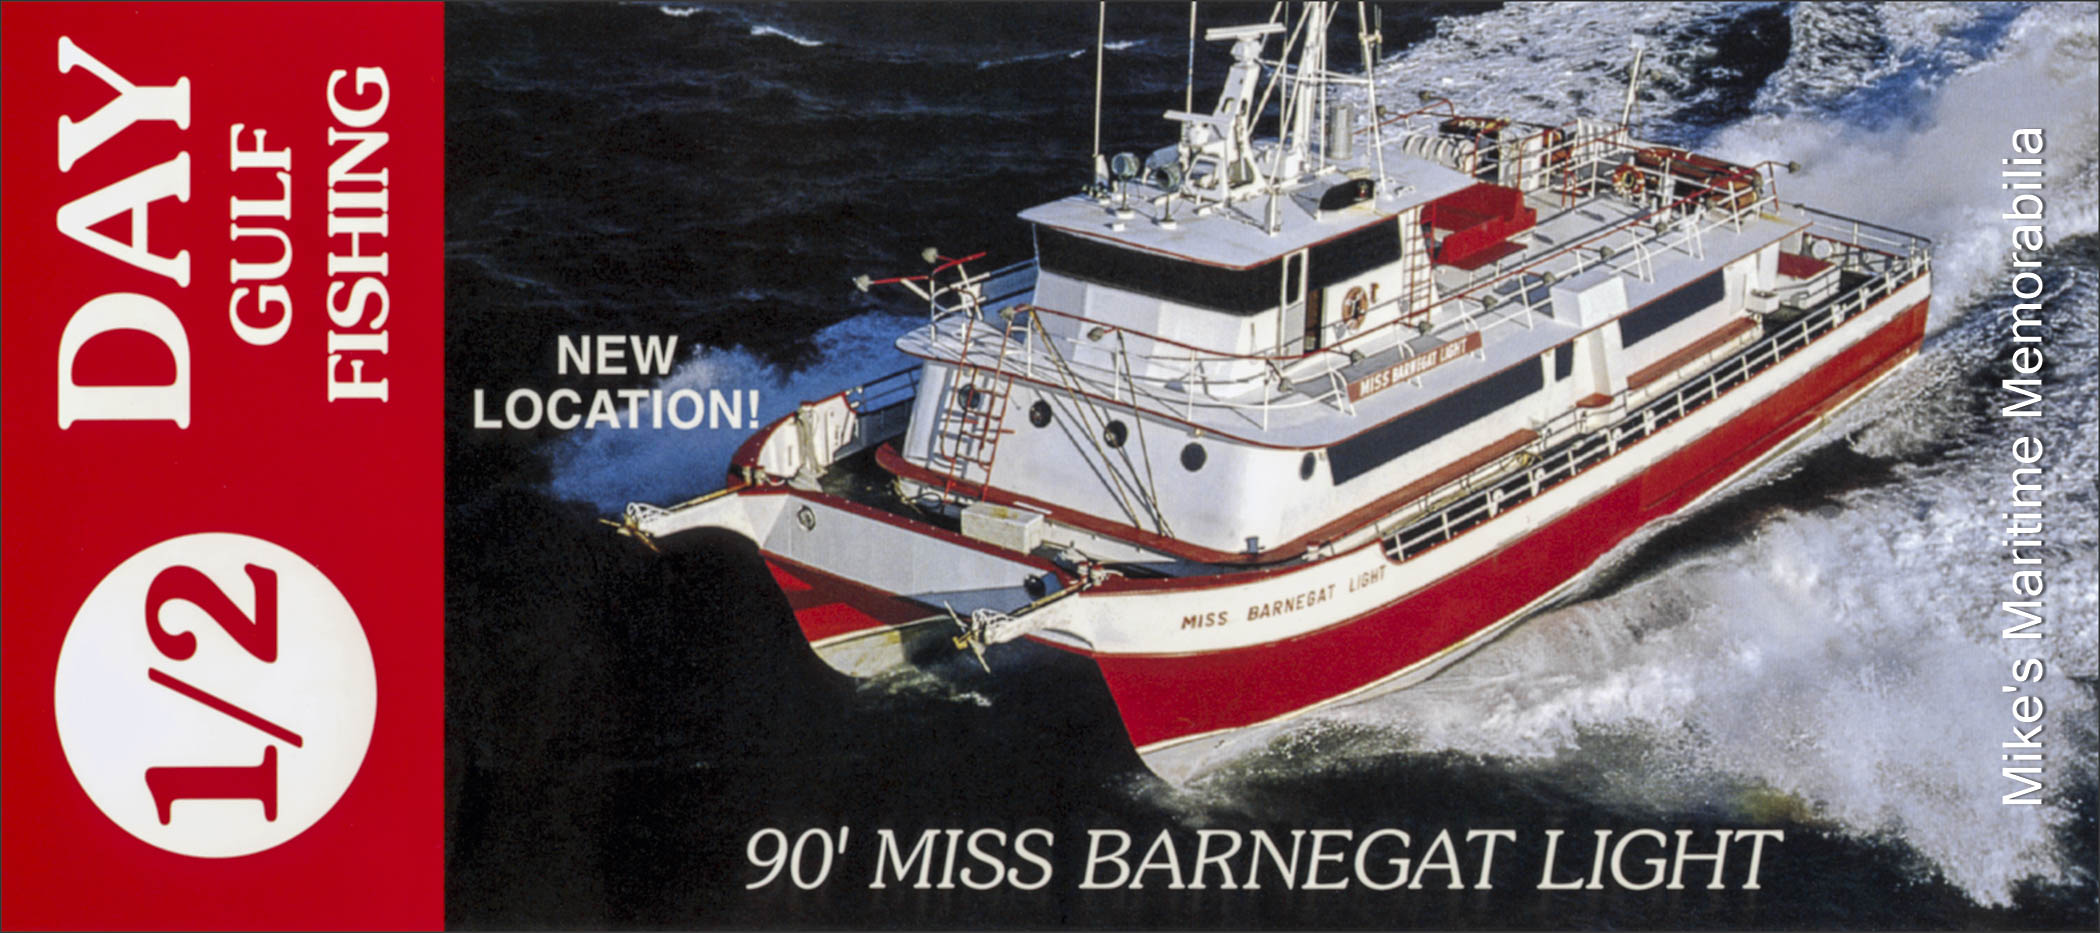 MISS BARNEGAT LIGHT, Barnegat Light, NJ – 2000 A rack card for Captain John Larson's "MISS BARNEGAT LIGHT" circa 2000. She sails from Barnegat Light, NJ during the spring and summer, and during the off-season, she sails from Fort Meyers Beach, FL. Affectionately known as the "Red Sled", she was built in 1974 by Breaux’s Bay Craft at Loreauville, LA. The "MISS BARNEGAT LIGHT" does an honest 26 Knots and is arguably one of the best offshore tuna boats in New Jersey. Sadly, Captain John Larson Sr. passed away in 2009. The rack card is courtesy of Bob Moro.